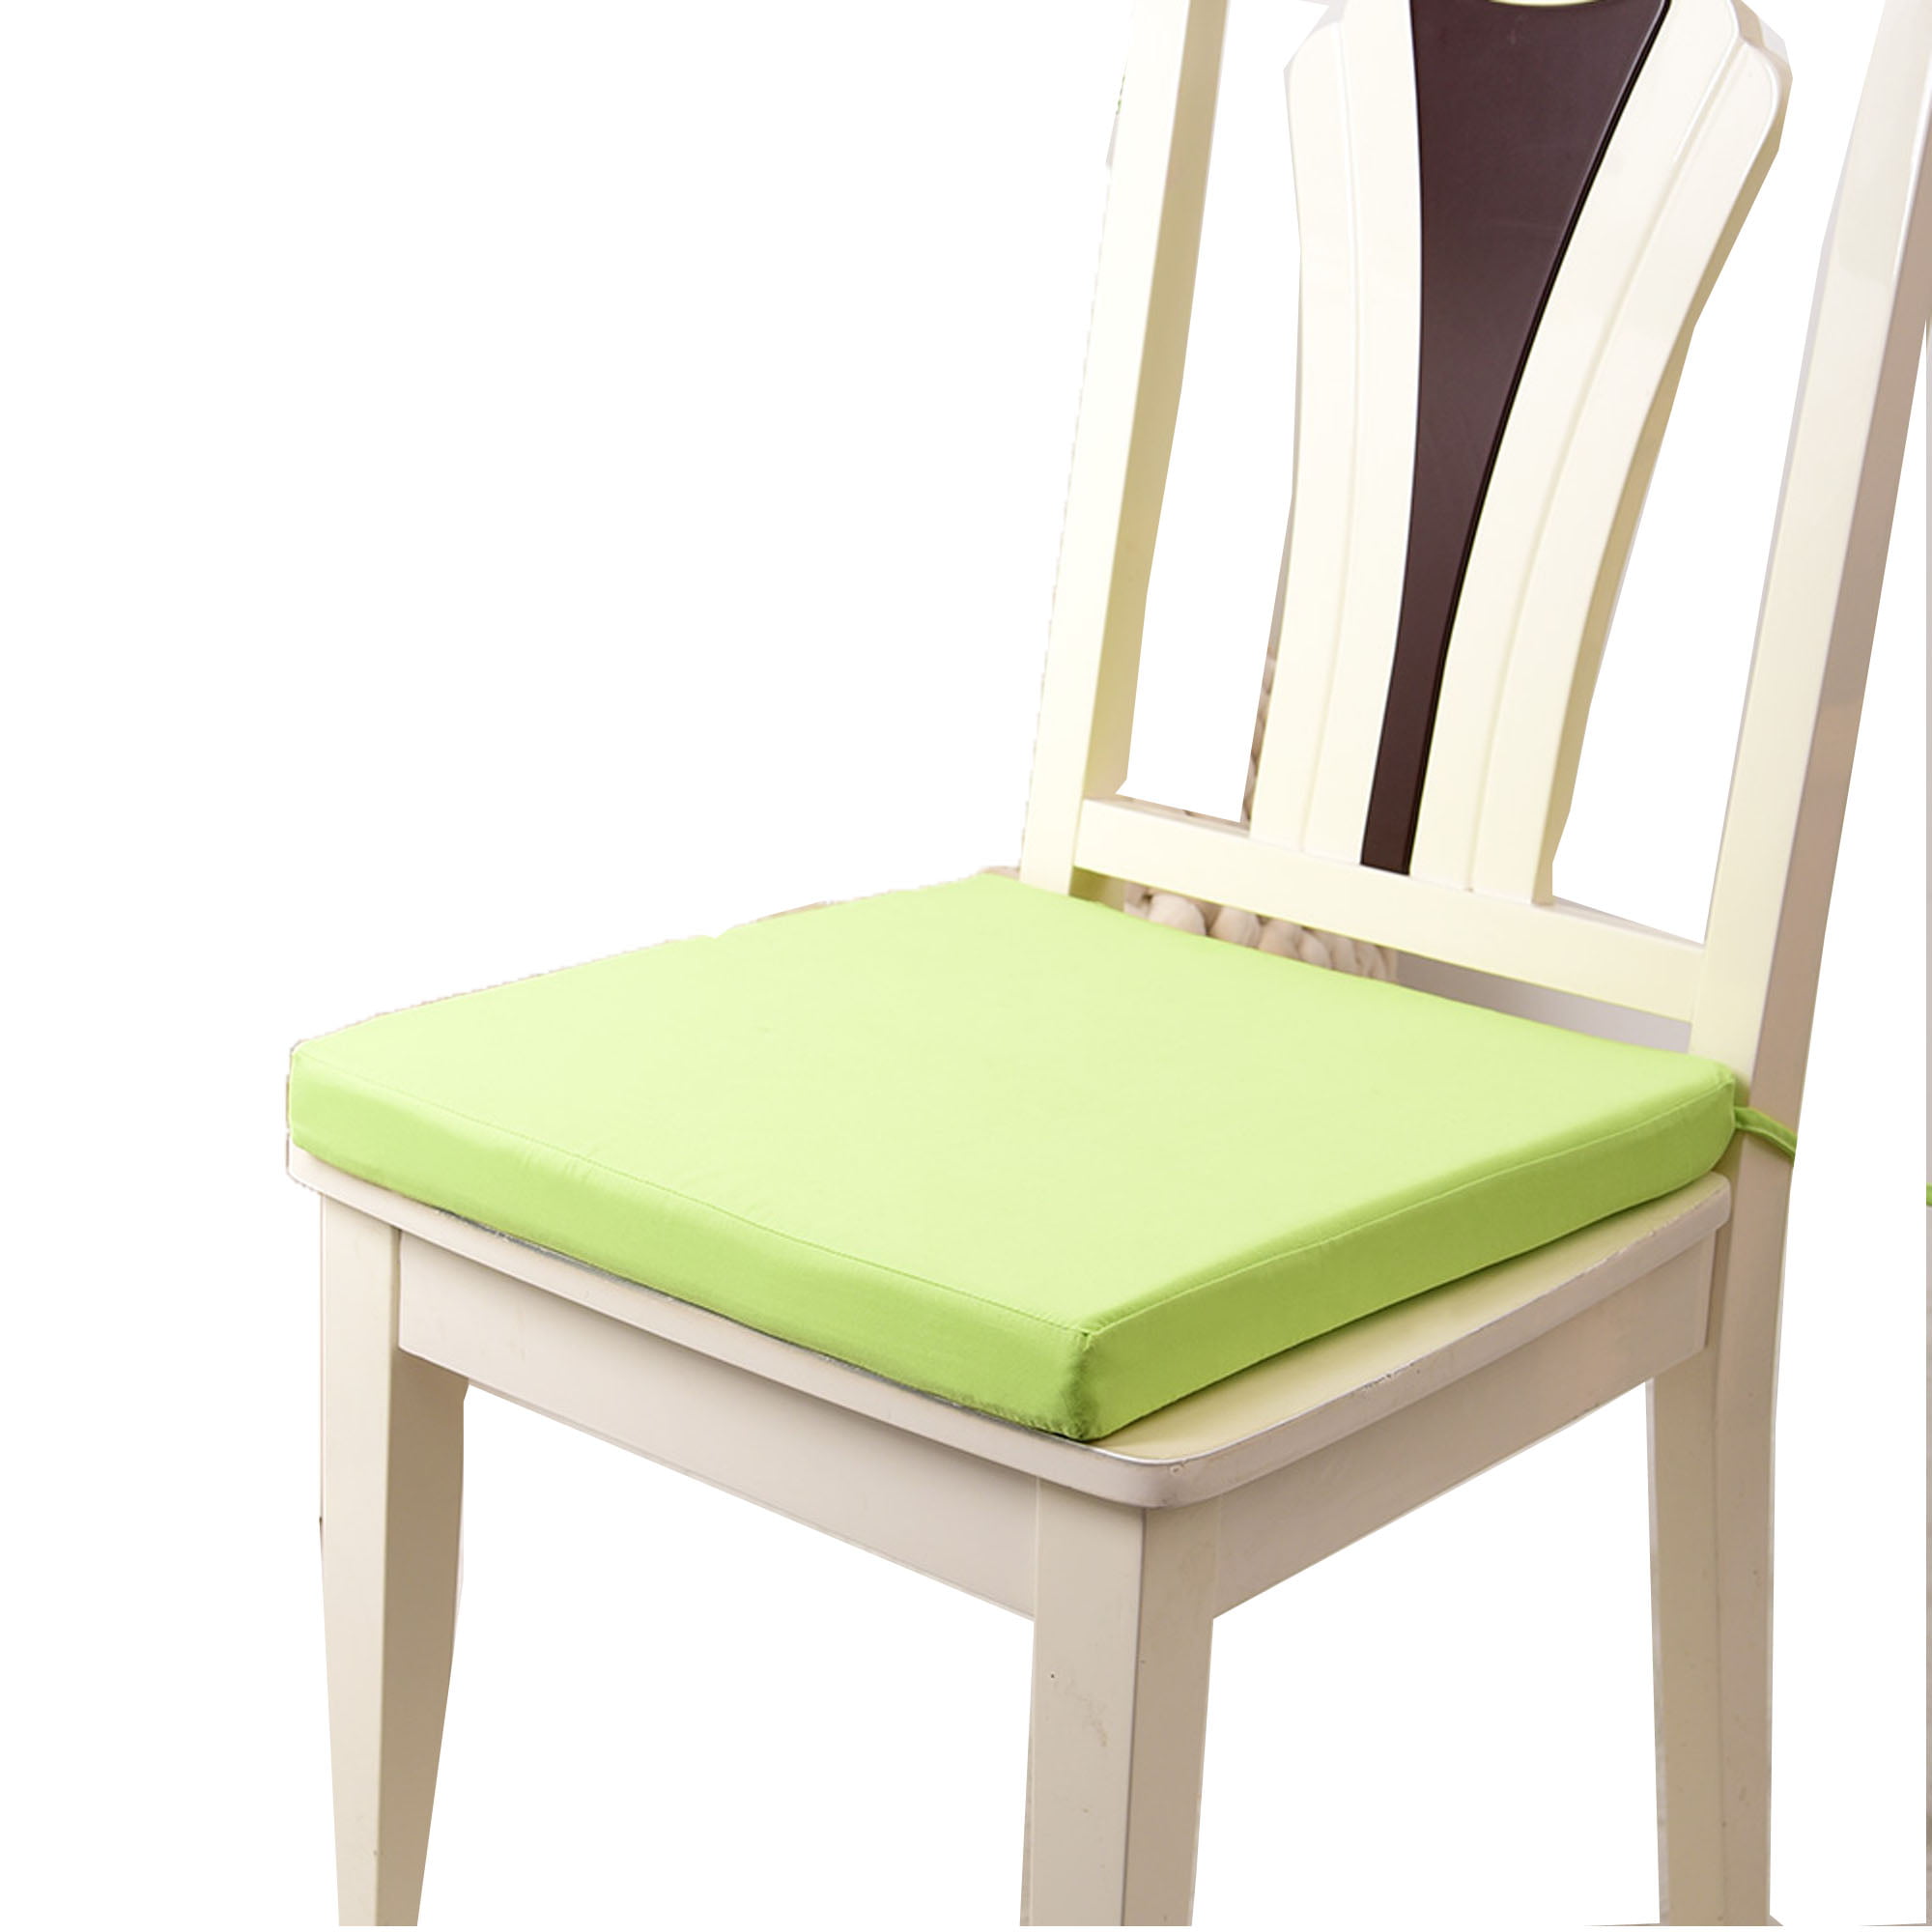 Removable Chair Cushion Outdoor Tie On Garden Patio Seat Pad! 